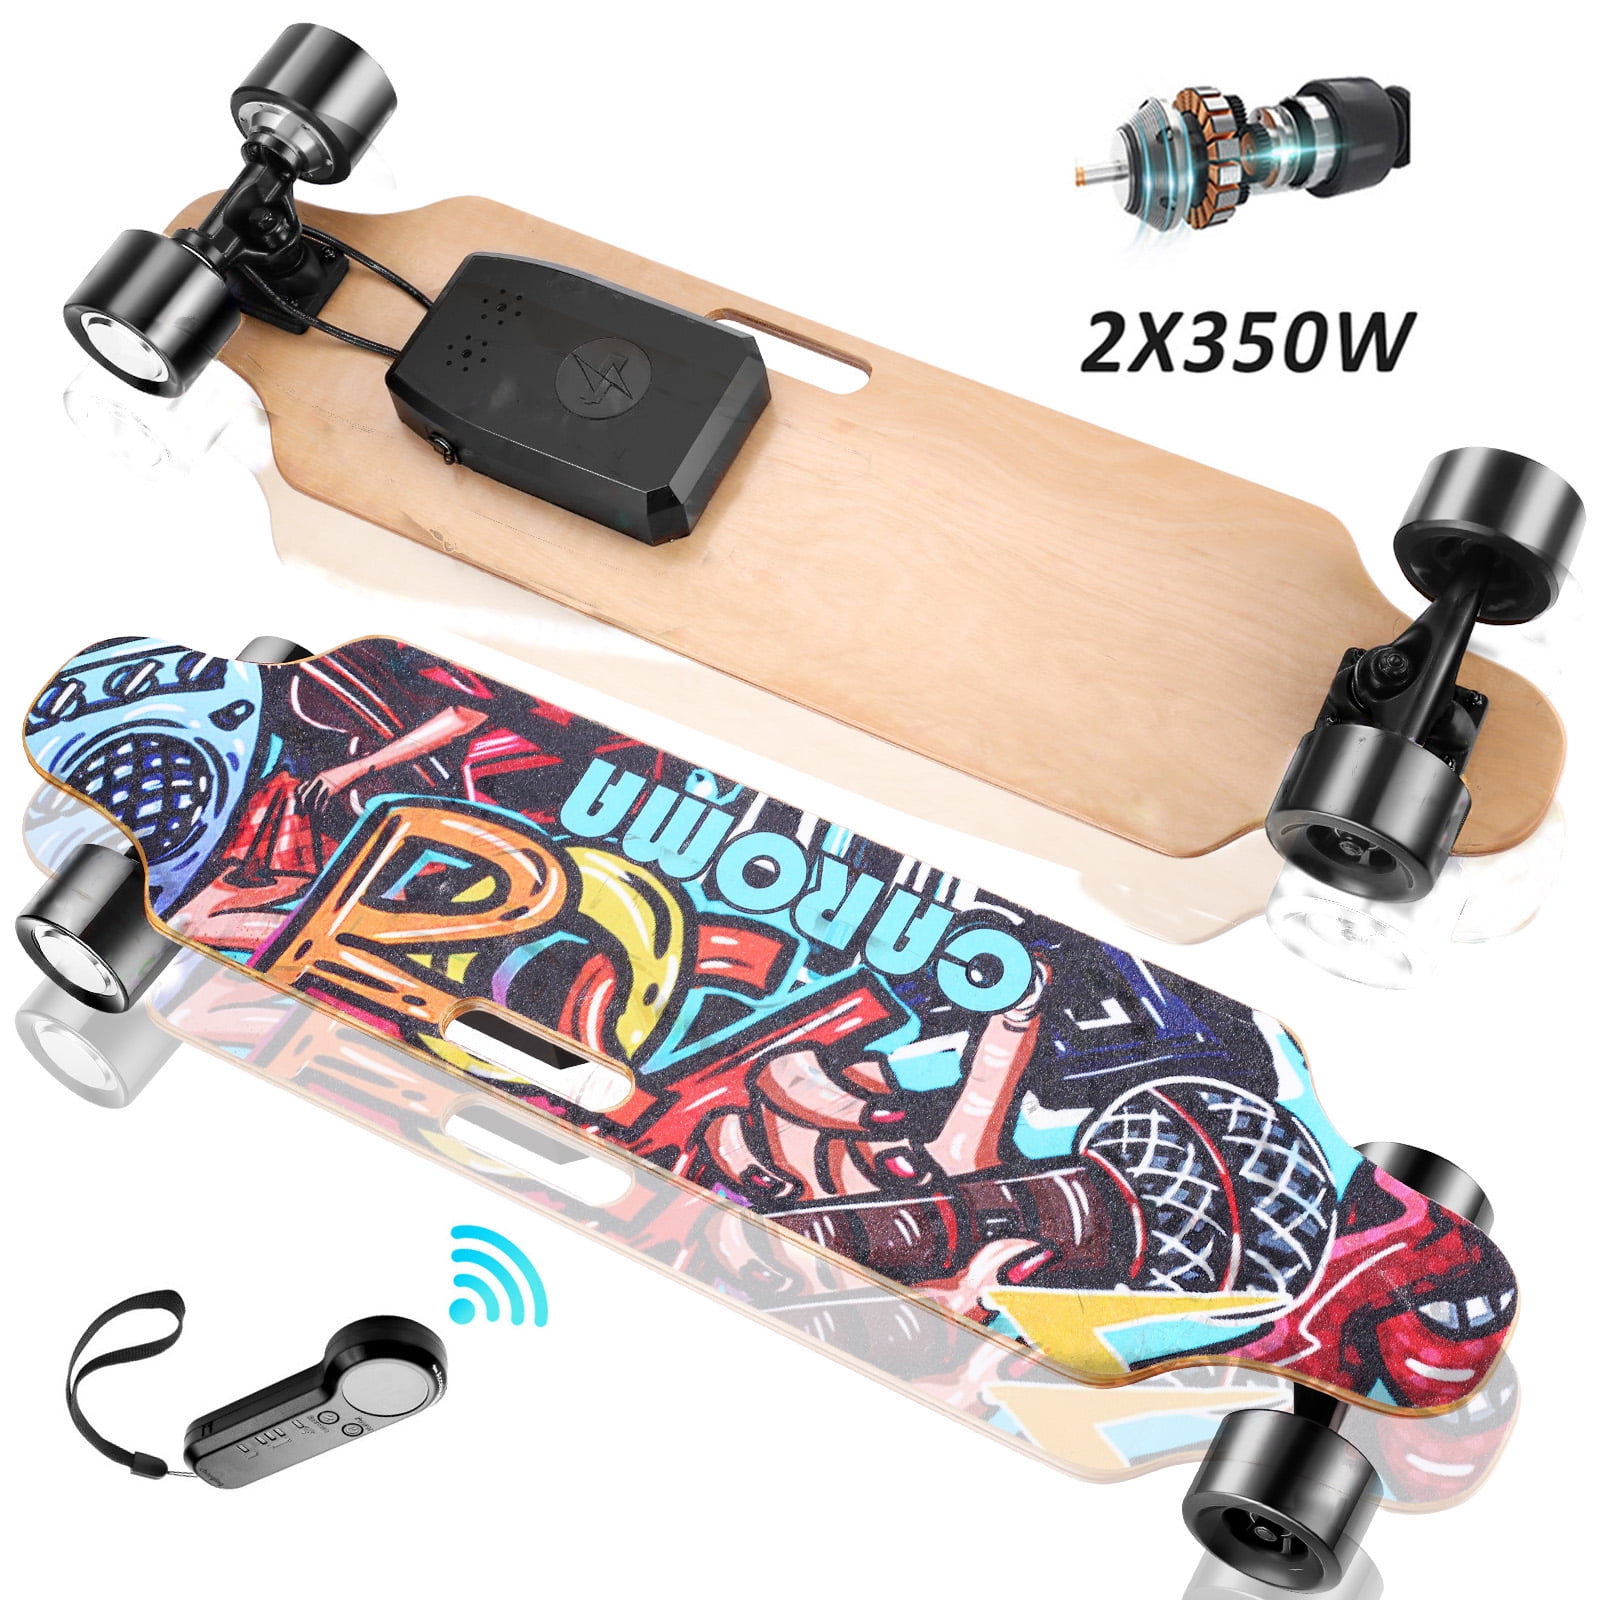 Details about   CAROMA 350W Electric Skateboard Cruiser Maple Long Board w/Remote Ctrl 3 Speeds 